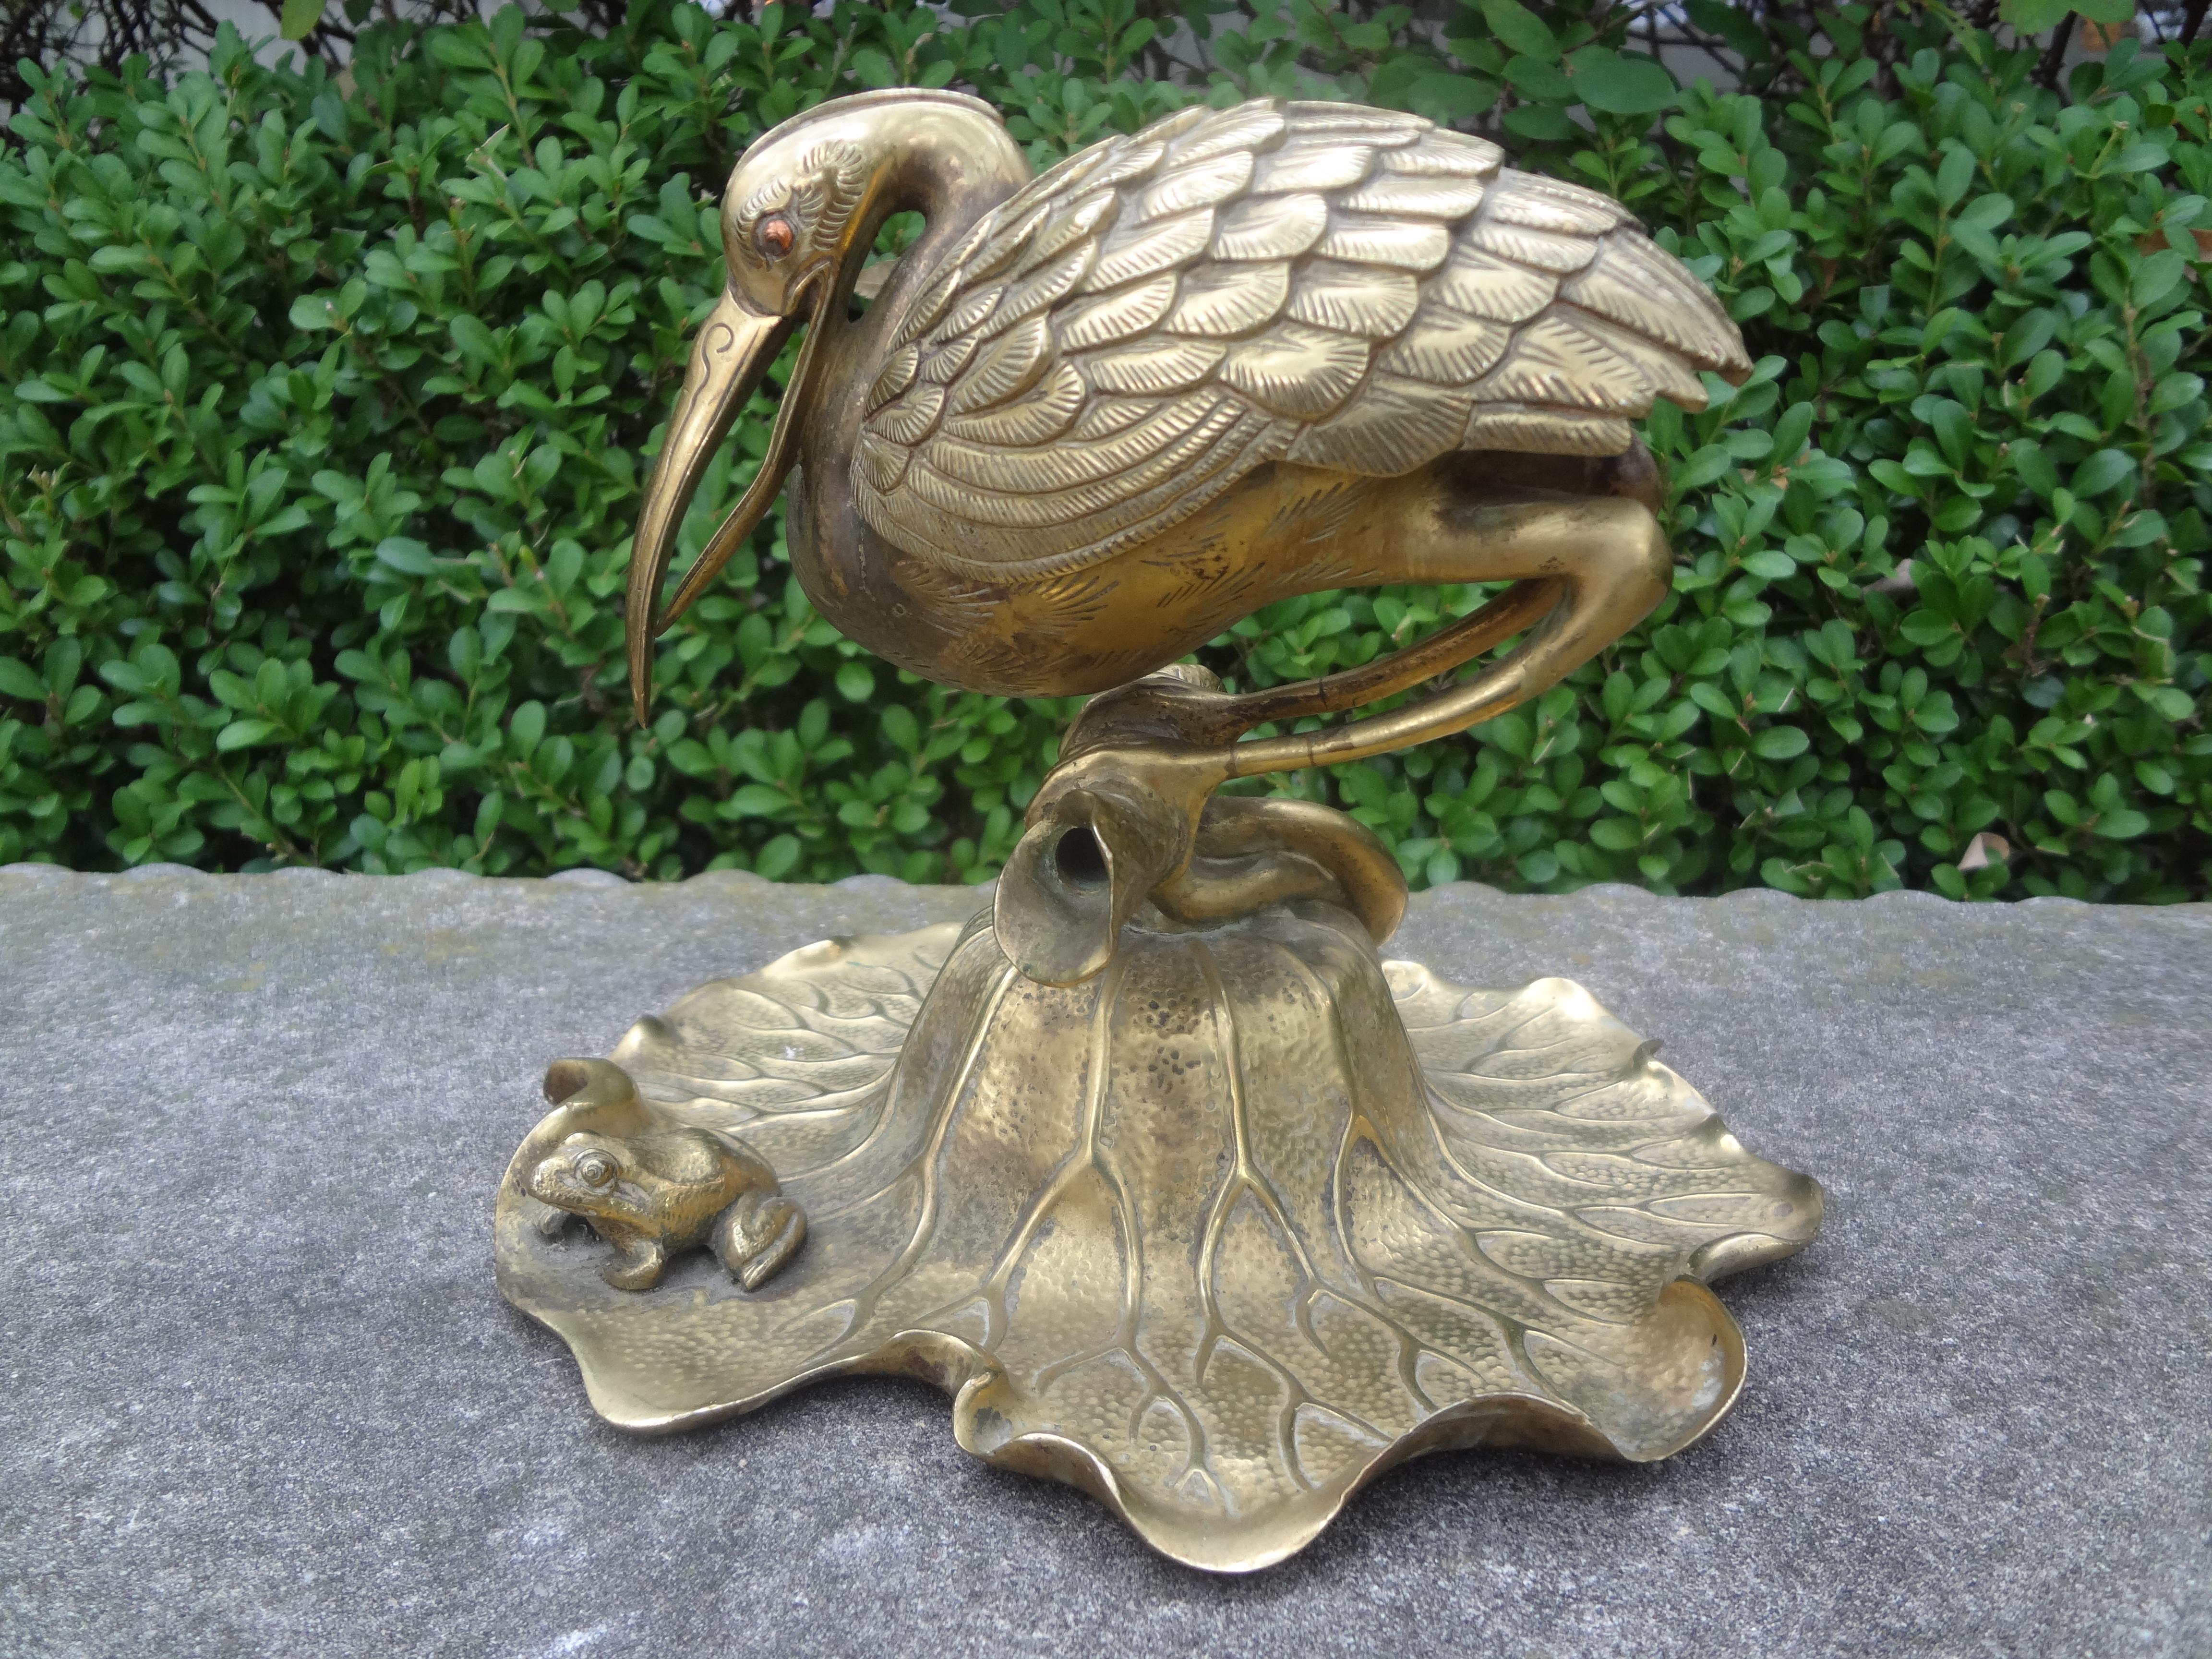 19th century French gilt bronze inkwell.
This stunning French Art Nouveau Napoleon III gilt bronze inkwell depicts a crane, heron or water fowl resting on a lily pad with a frog. Our bronze inkwell has a slide for a pen. Unfortunately unsigned but